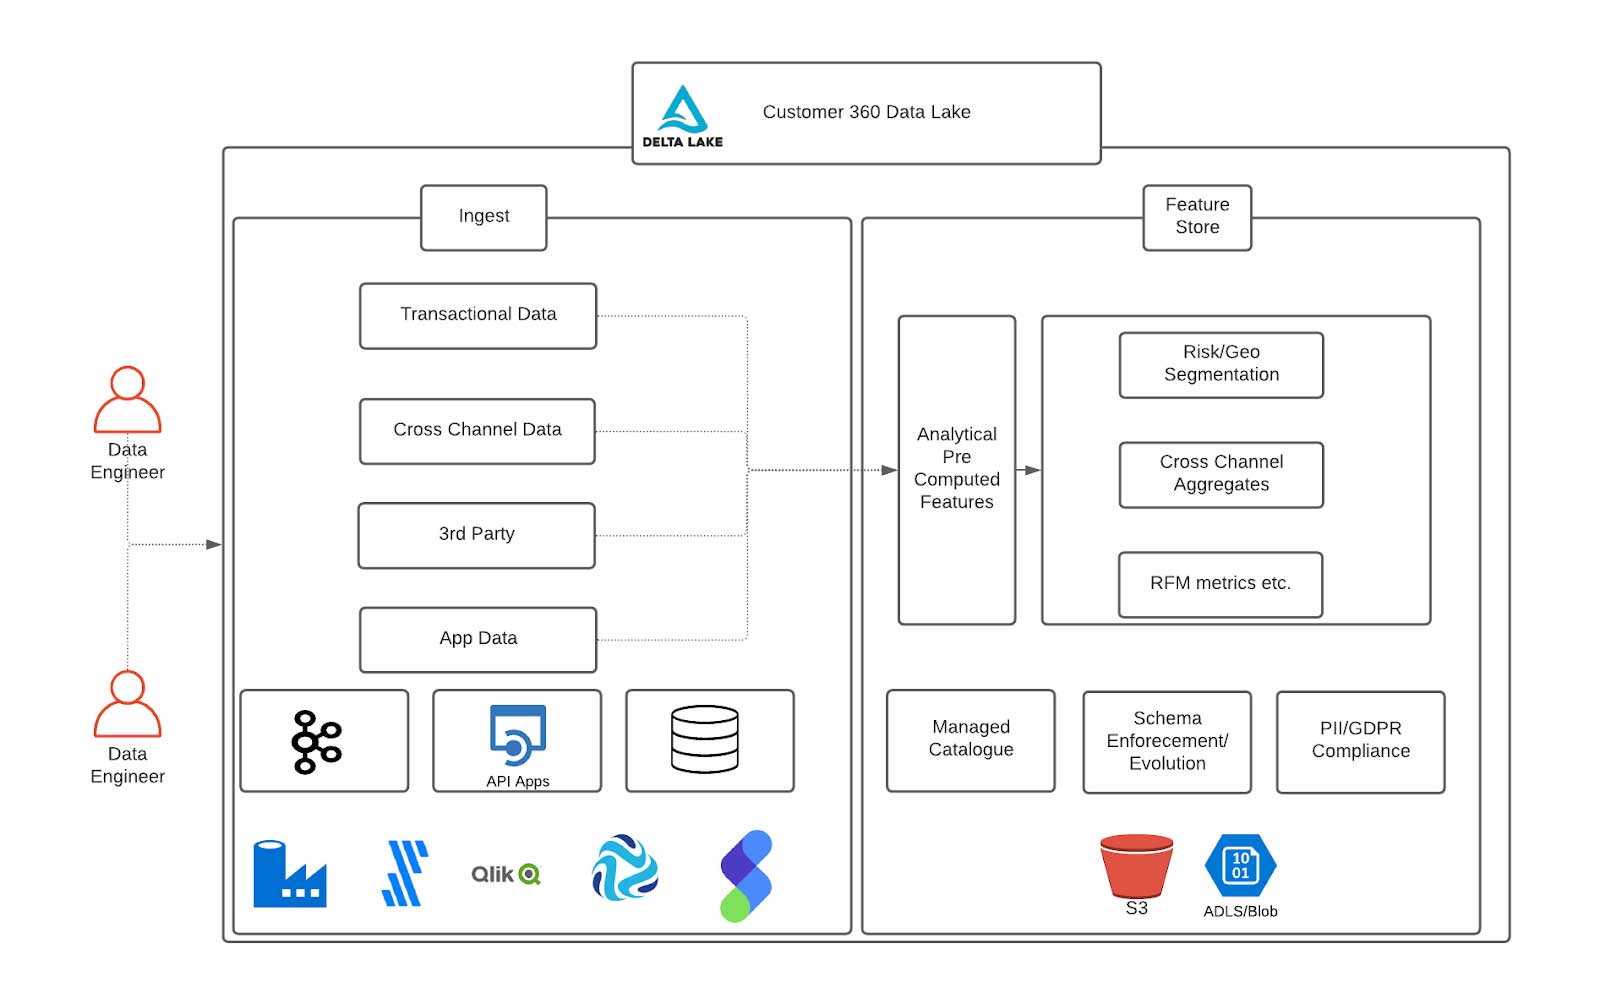 A unified data lake to store and catalog customer data and enable new feature creation at scale